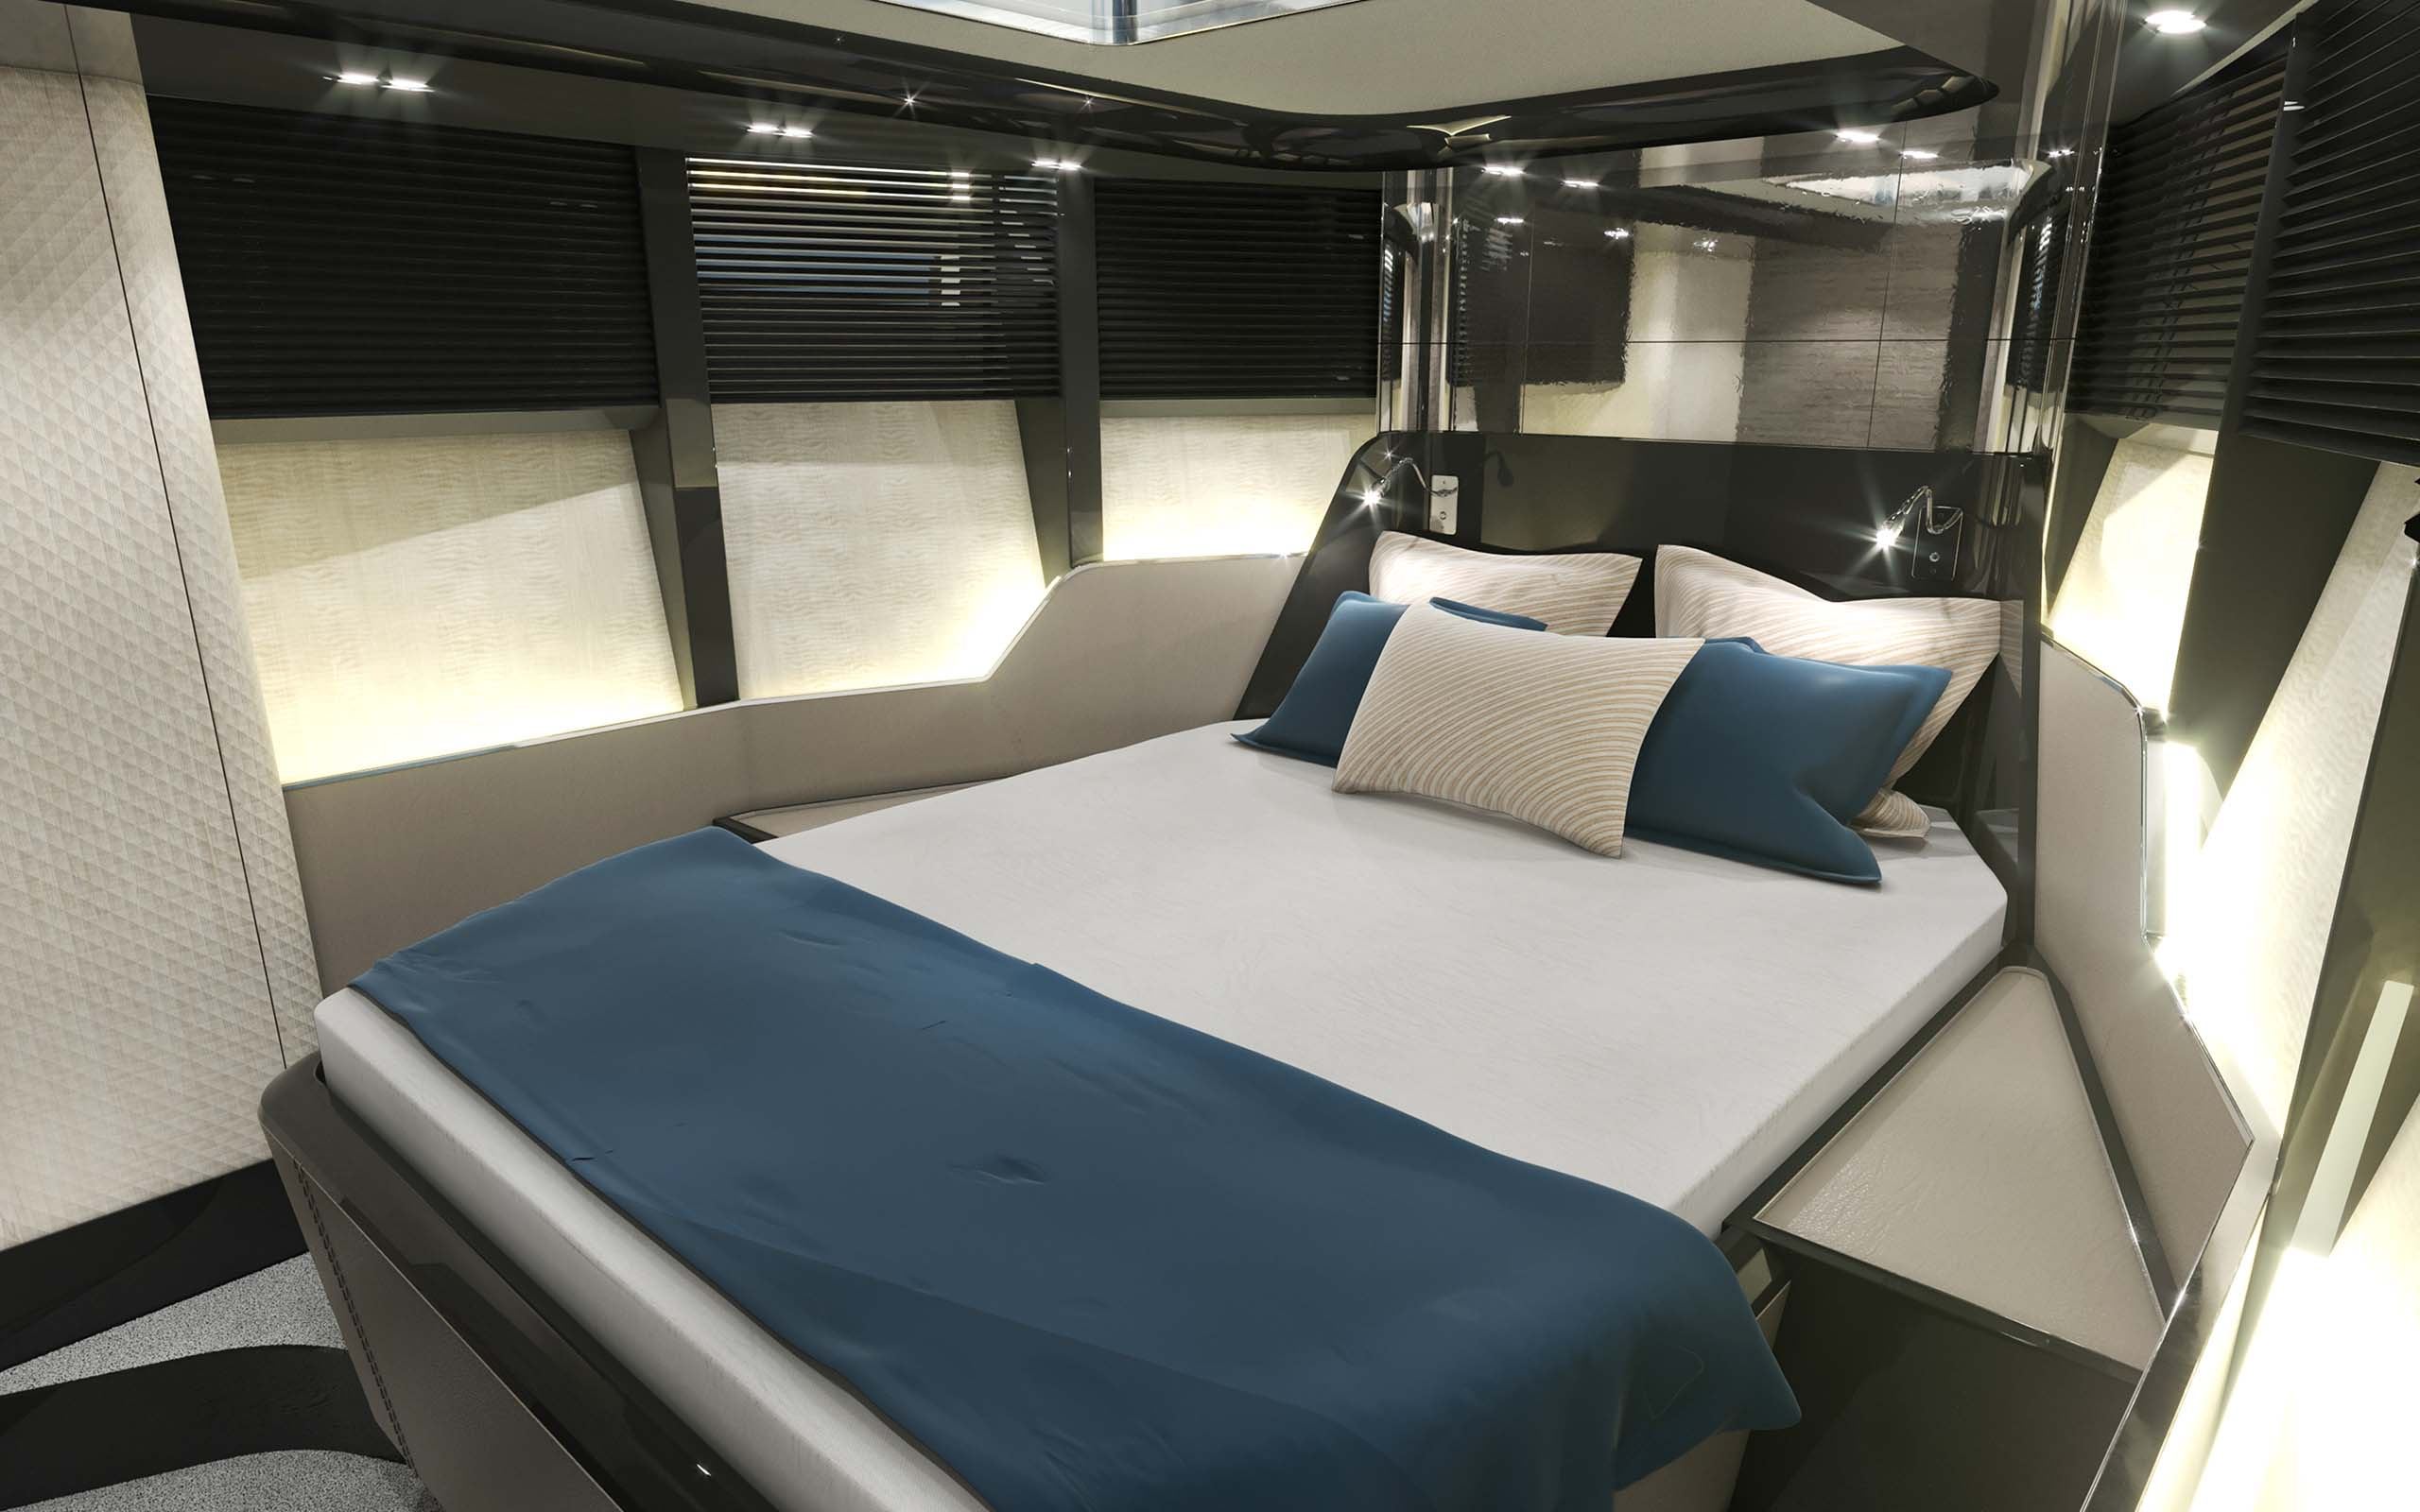 Motor Yacht 40ft Master Bedroom Interior Table by Suvorov Yacht Design